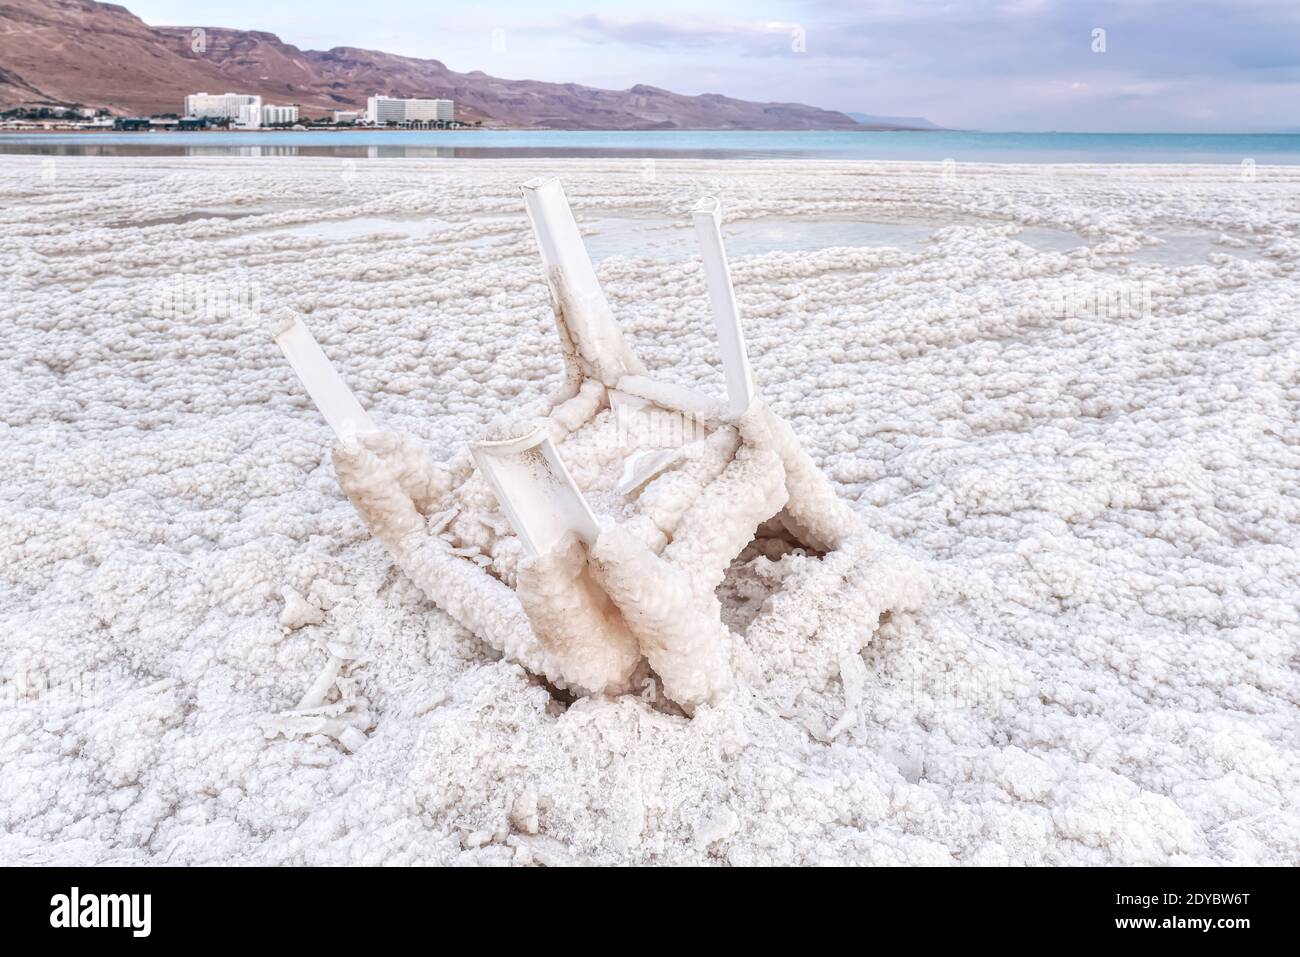 Small plastic chair completely covered with crystalline salt on shore of dead sea, closeup detail, blurred hotel resorts in distance - Ein Bokek Stock Photo